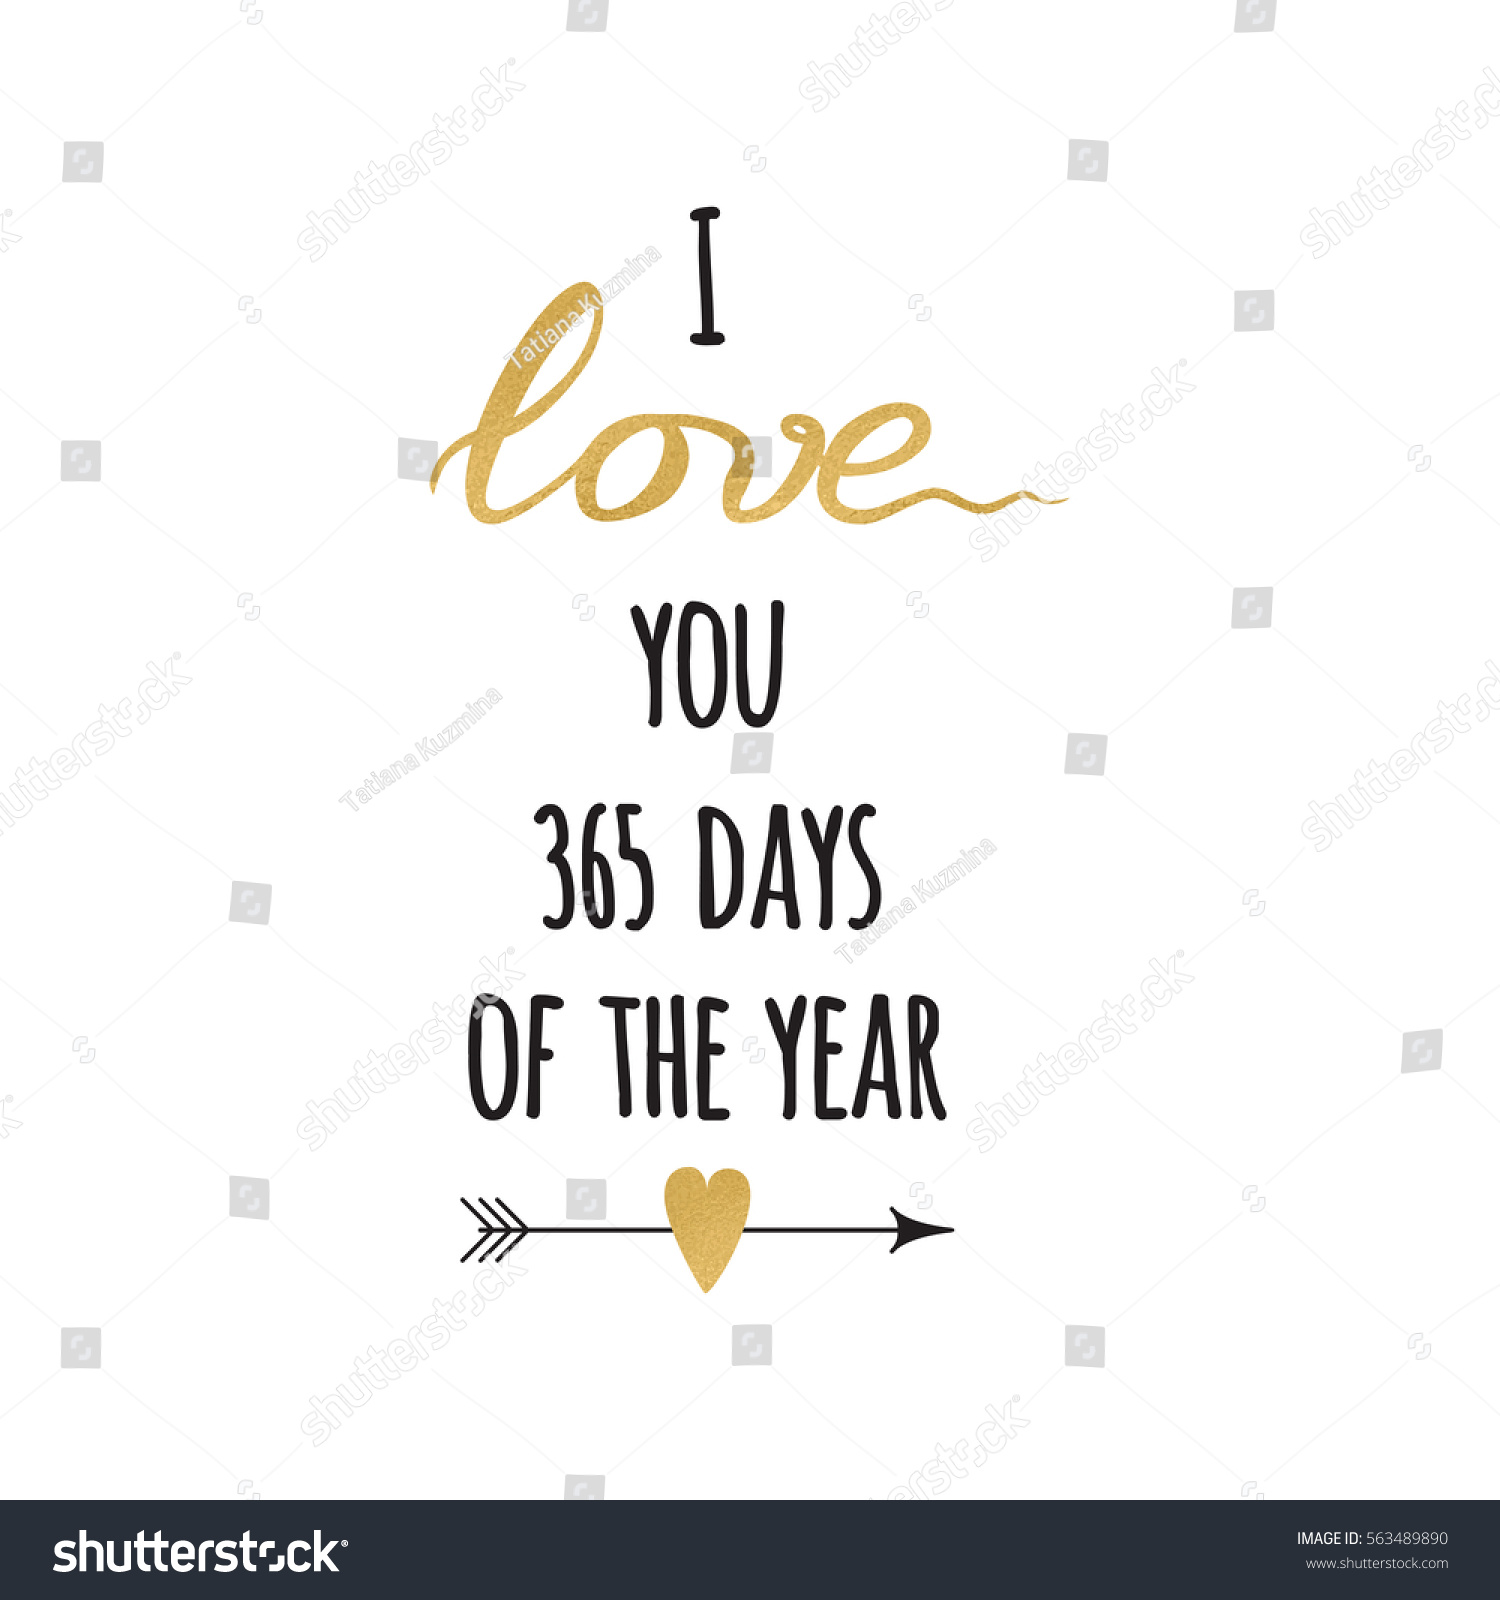 26 with sparkle inspirational hand drawn love quote I love you 365 days